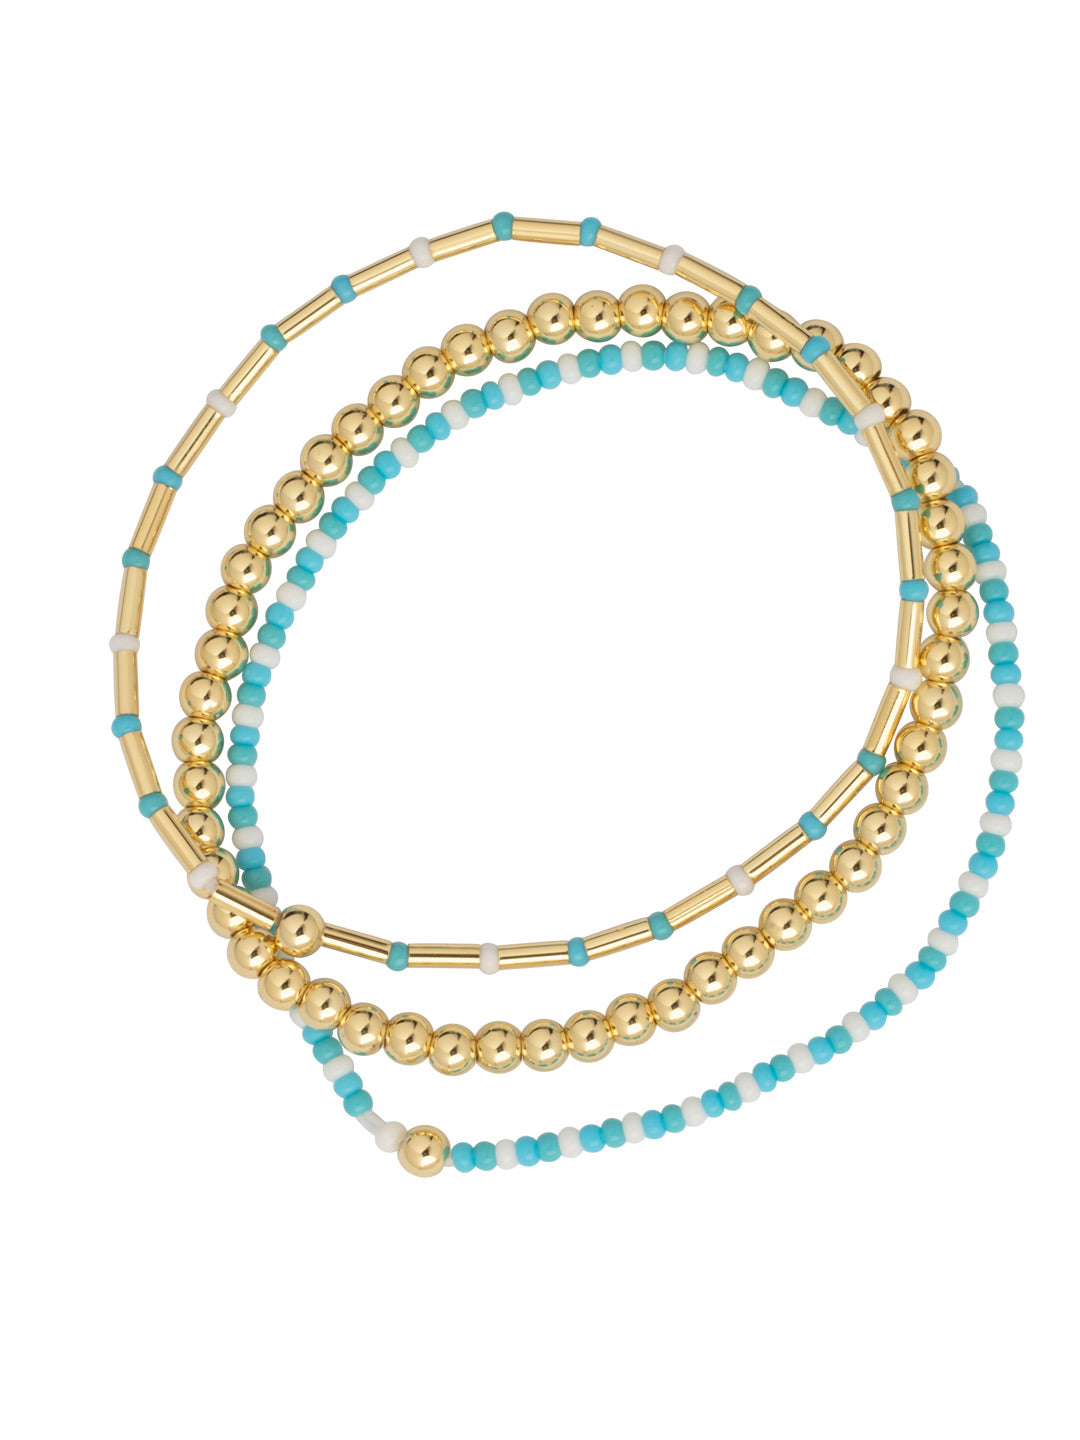 Trina Stretch Bracelet - BFM5BGSTO - <p>The Trina Stretch Bracelets features 3 assorted stretch bracelets; perfect to mix, match, and stack with your favorite bracelets! From Sorrelli's Santorini collection in our Bright Gold-tone finish.</p>